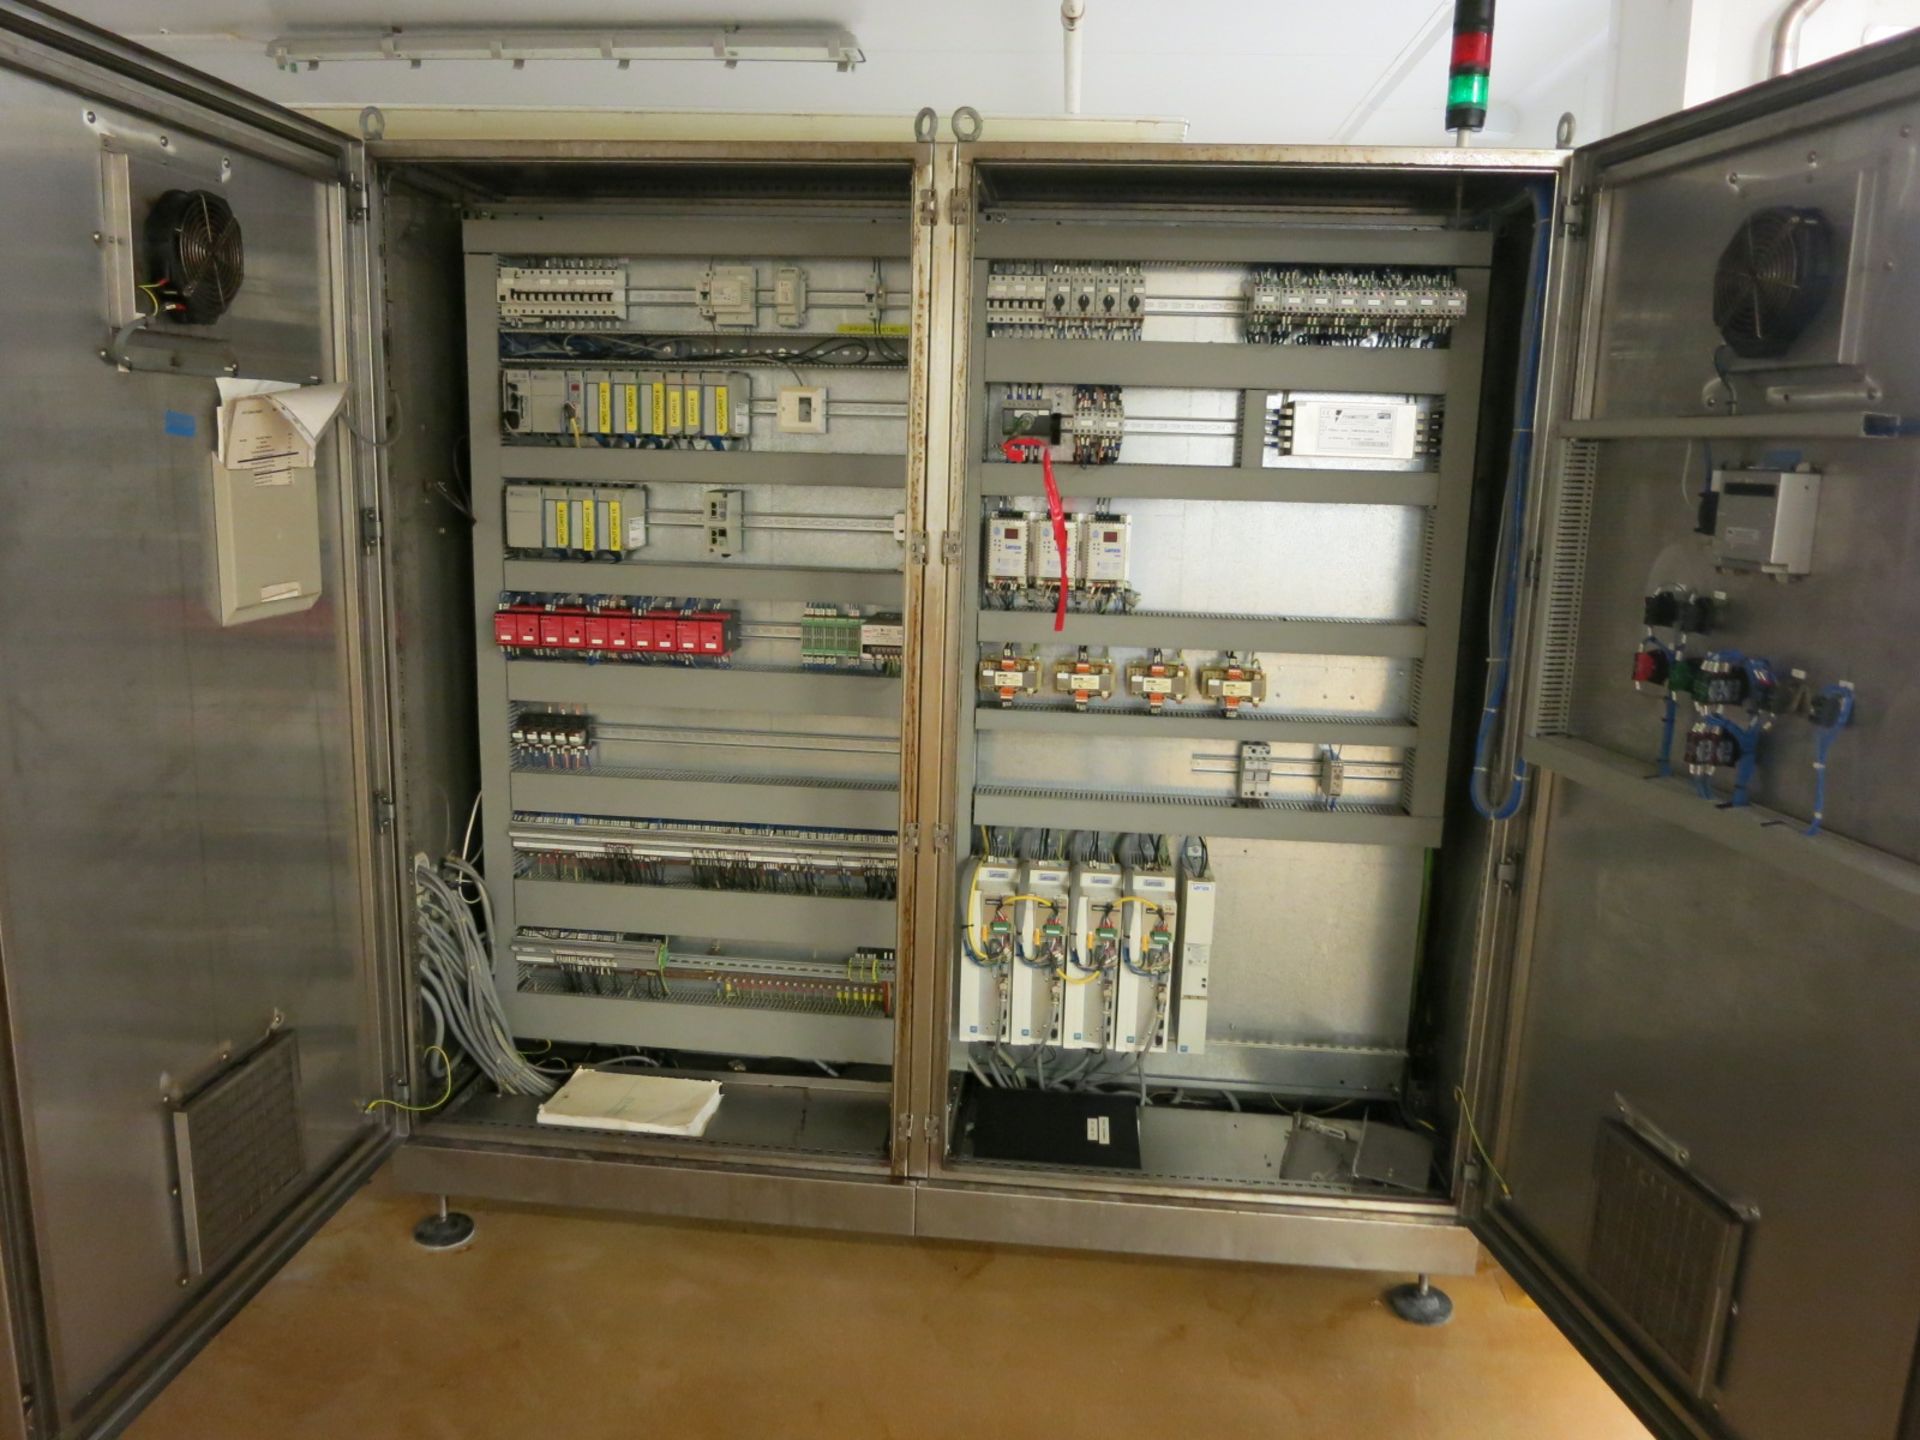 Pick & Place Control Panel - Image 3 of 3